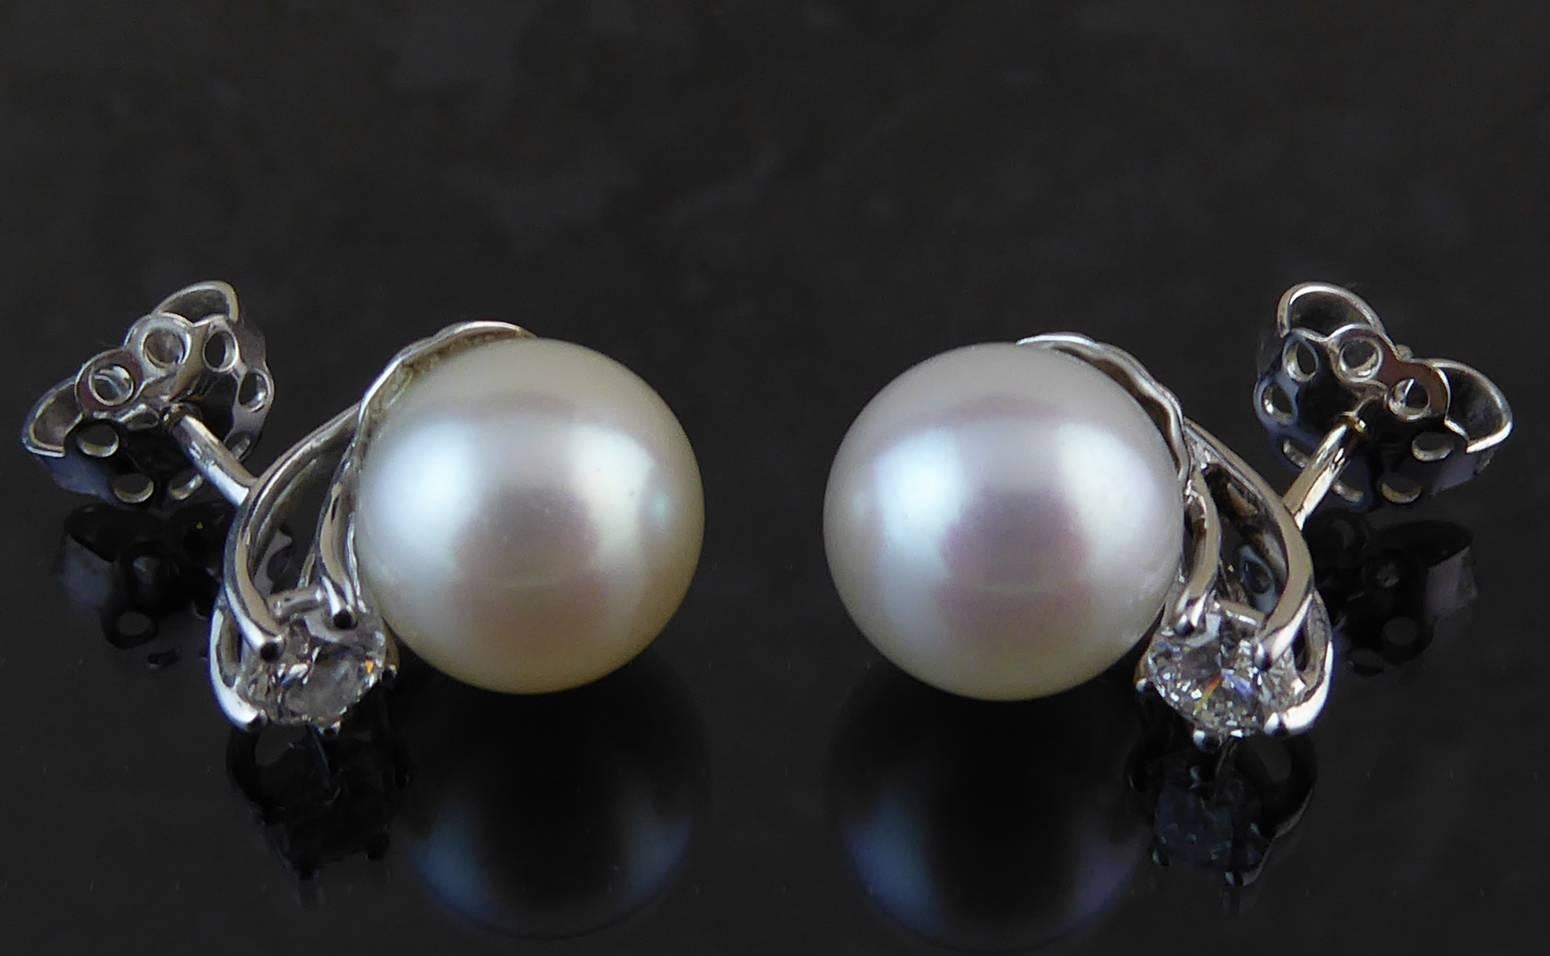 Two South Sea cultured pearls approx. 9.7mm wide of light creamy rose colour and medium lustre.  The pearls are set on white gold cup mounts with four elongated curved bars terminating in a brilliant cut diamond, each diamond being approx. 0.23ct